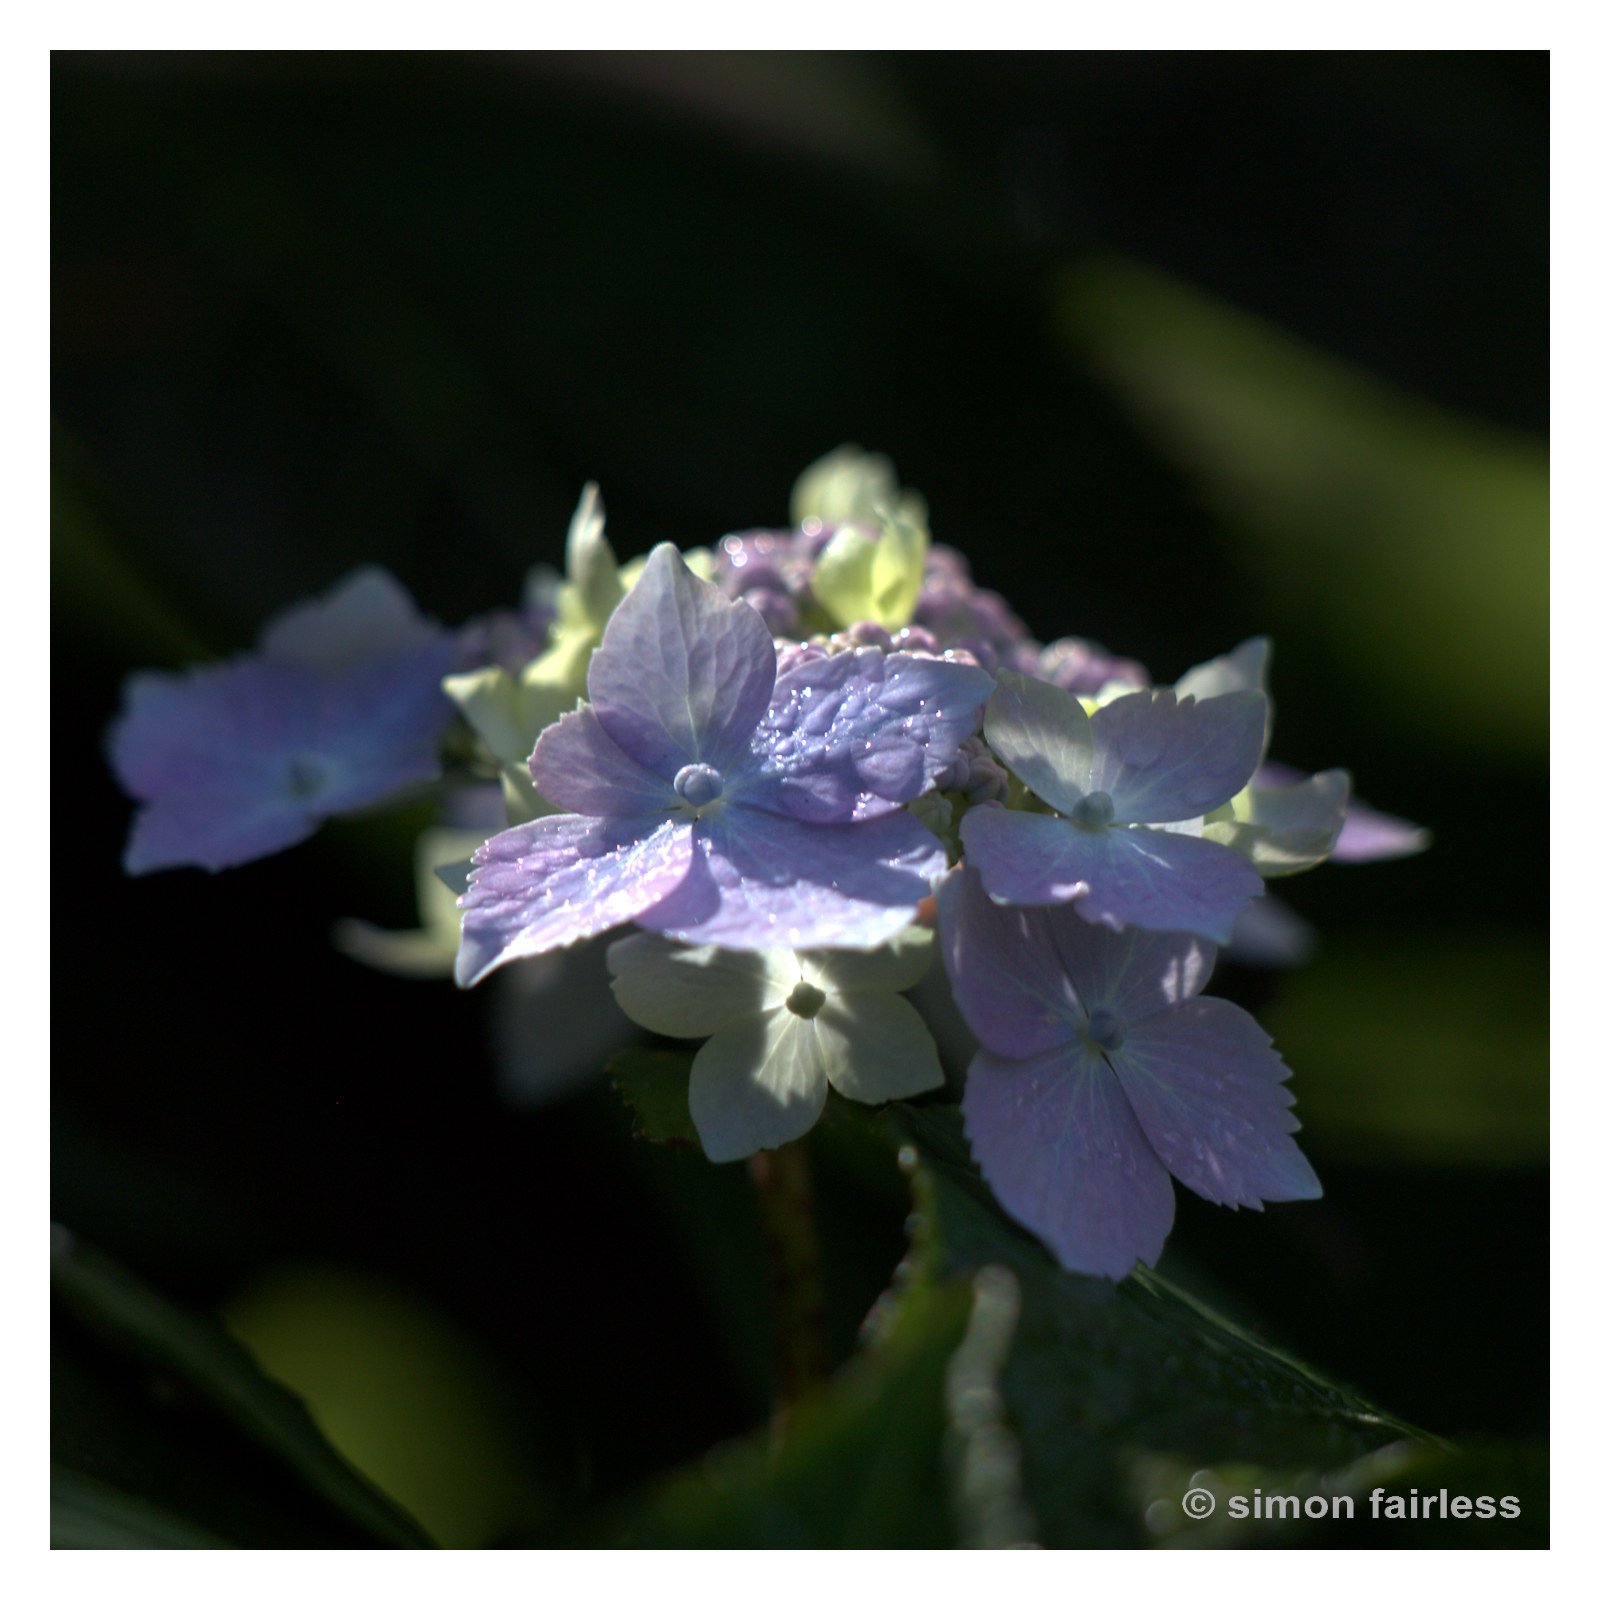 Floral Image of hydrangea flower